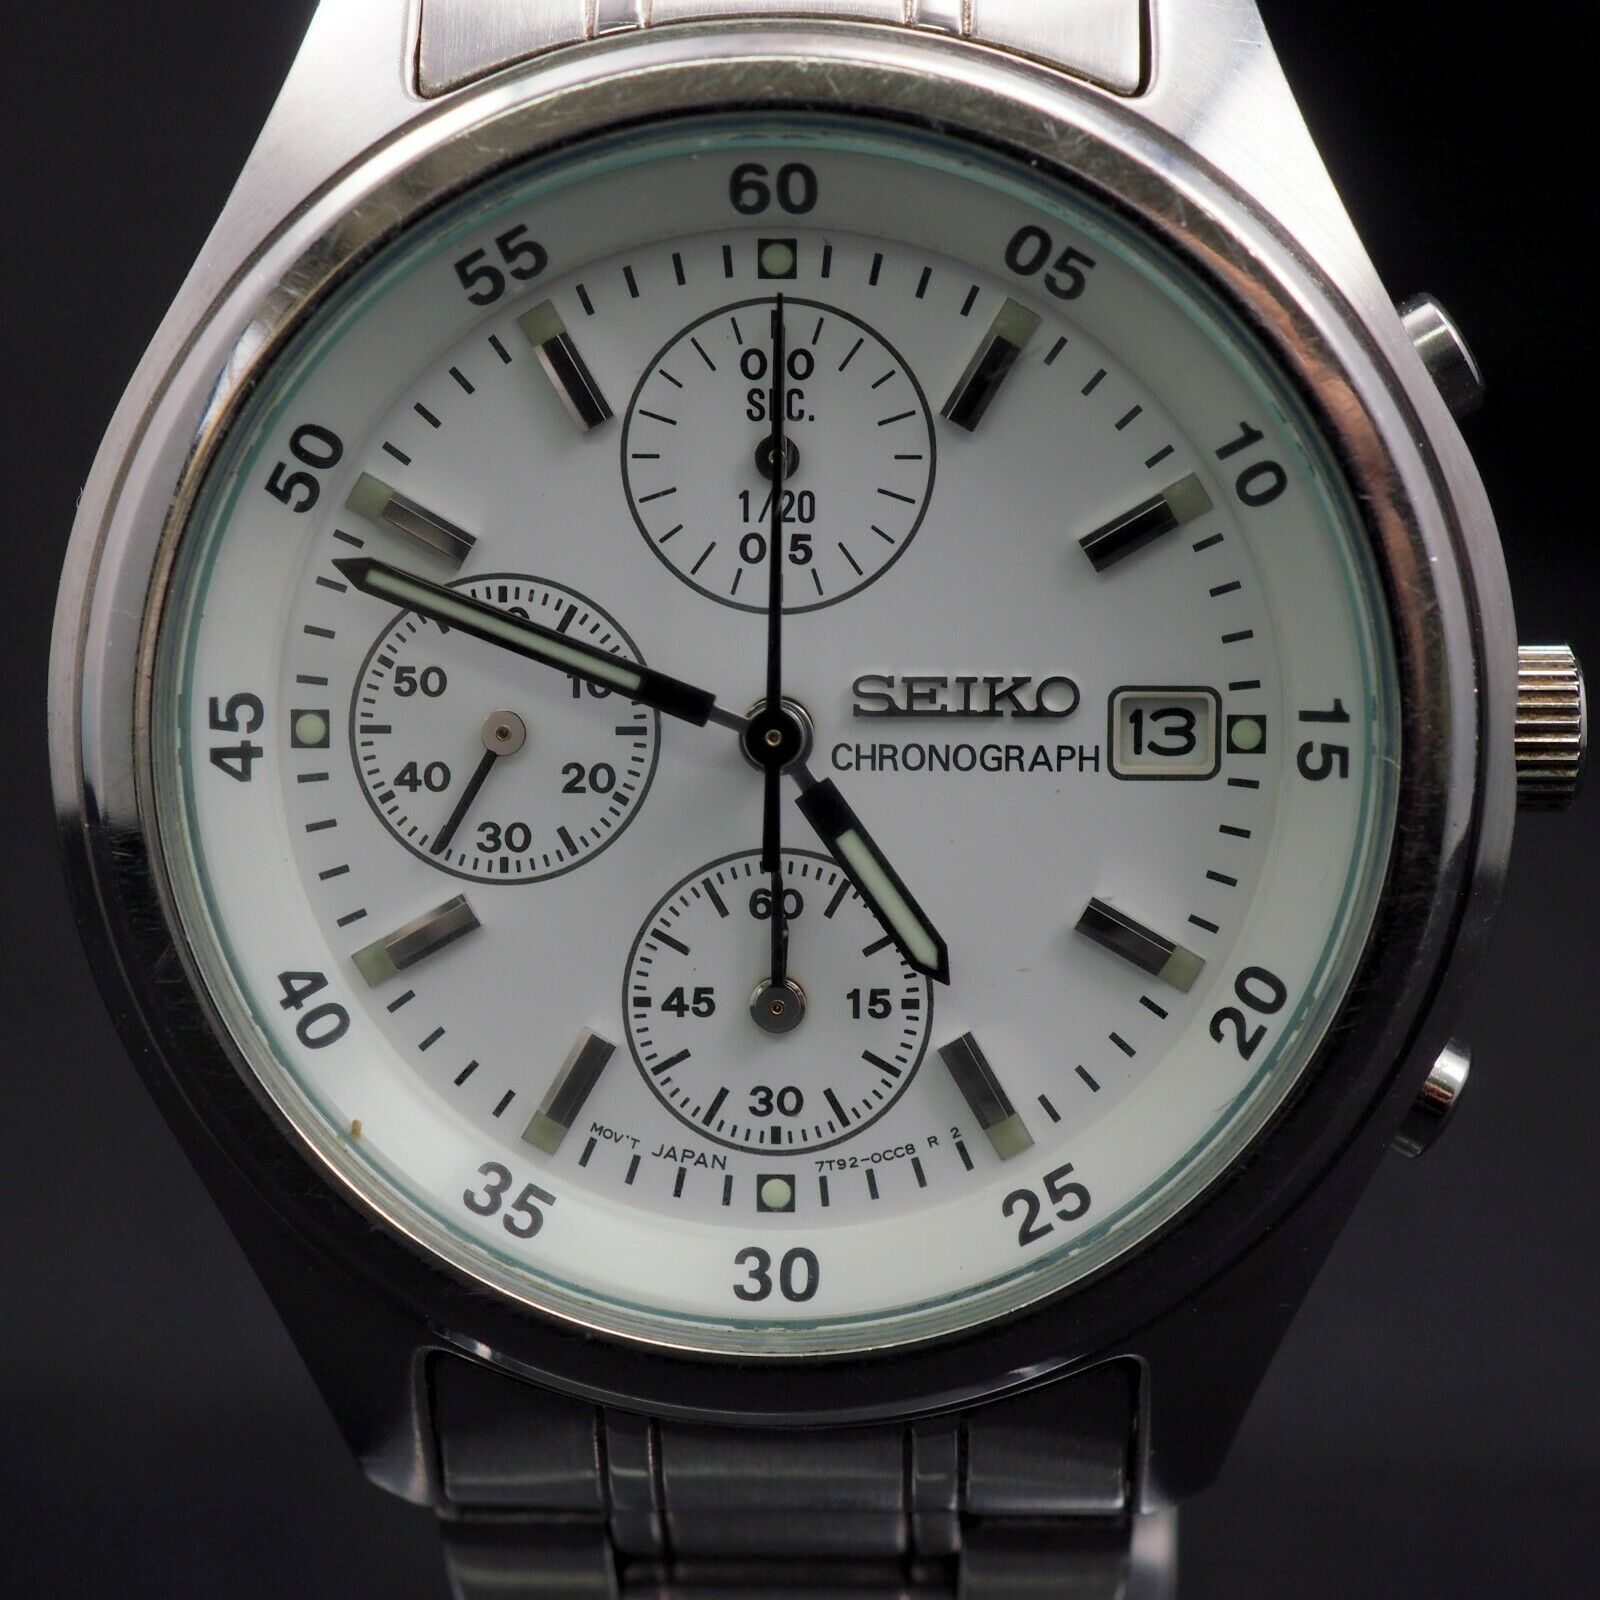 SEIKO 7T92-0CC0 CHRONOGRAPH WATCH not works Needs Repair / PARTS |  WatchCharts